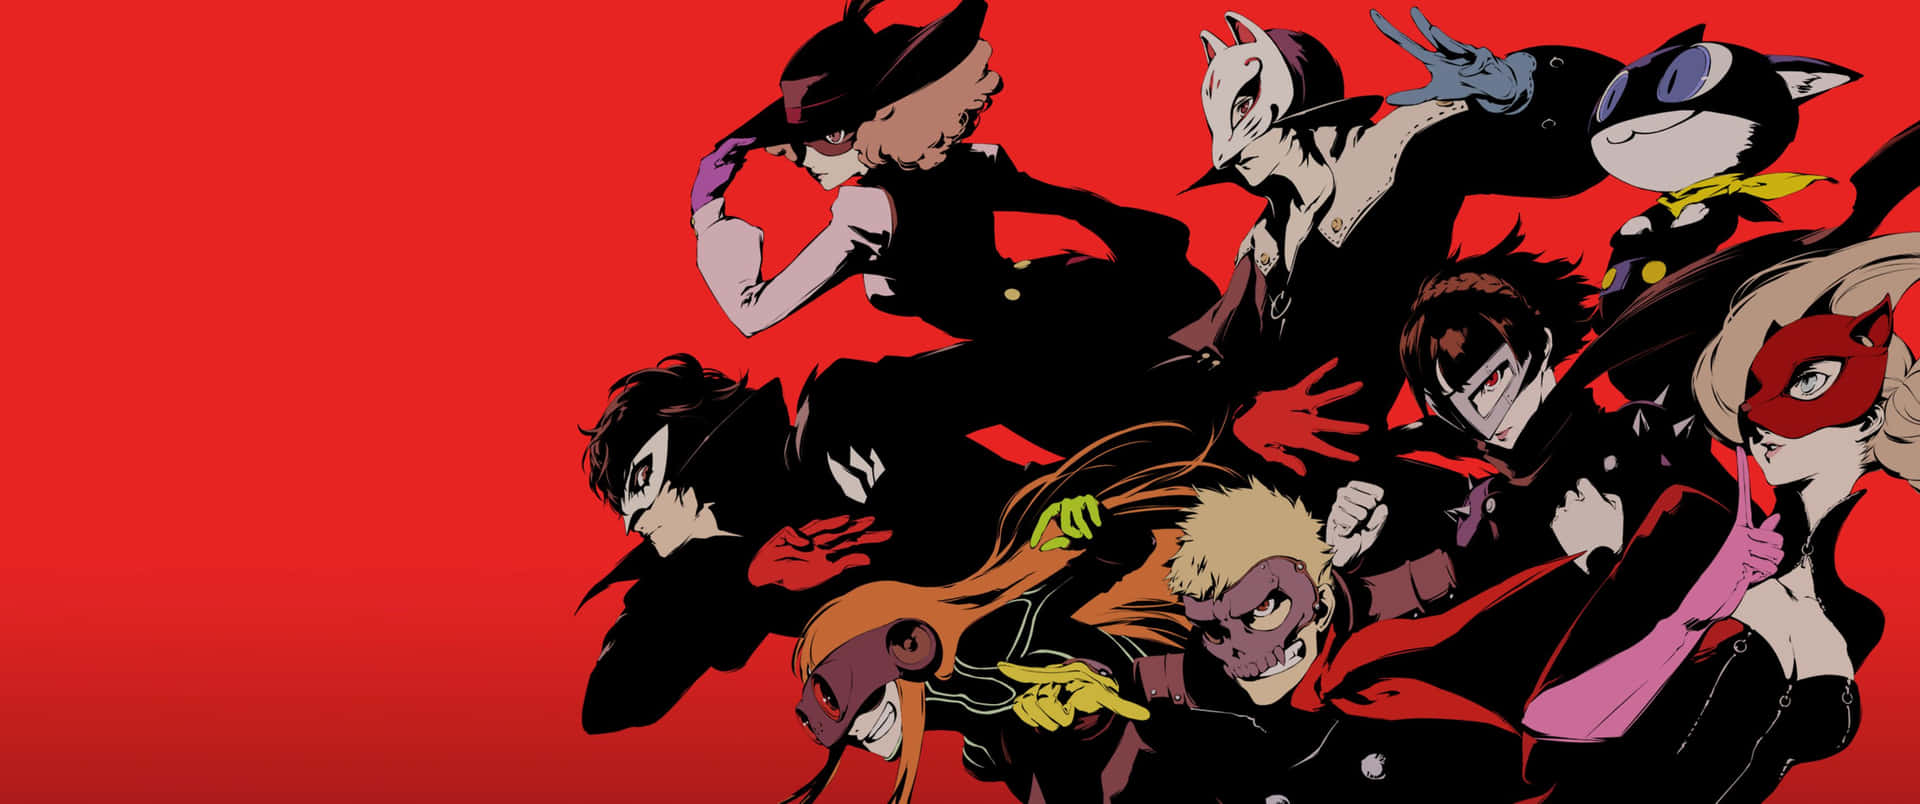 Joker from Persona 5 takes on a daring mission. Wallpaper